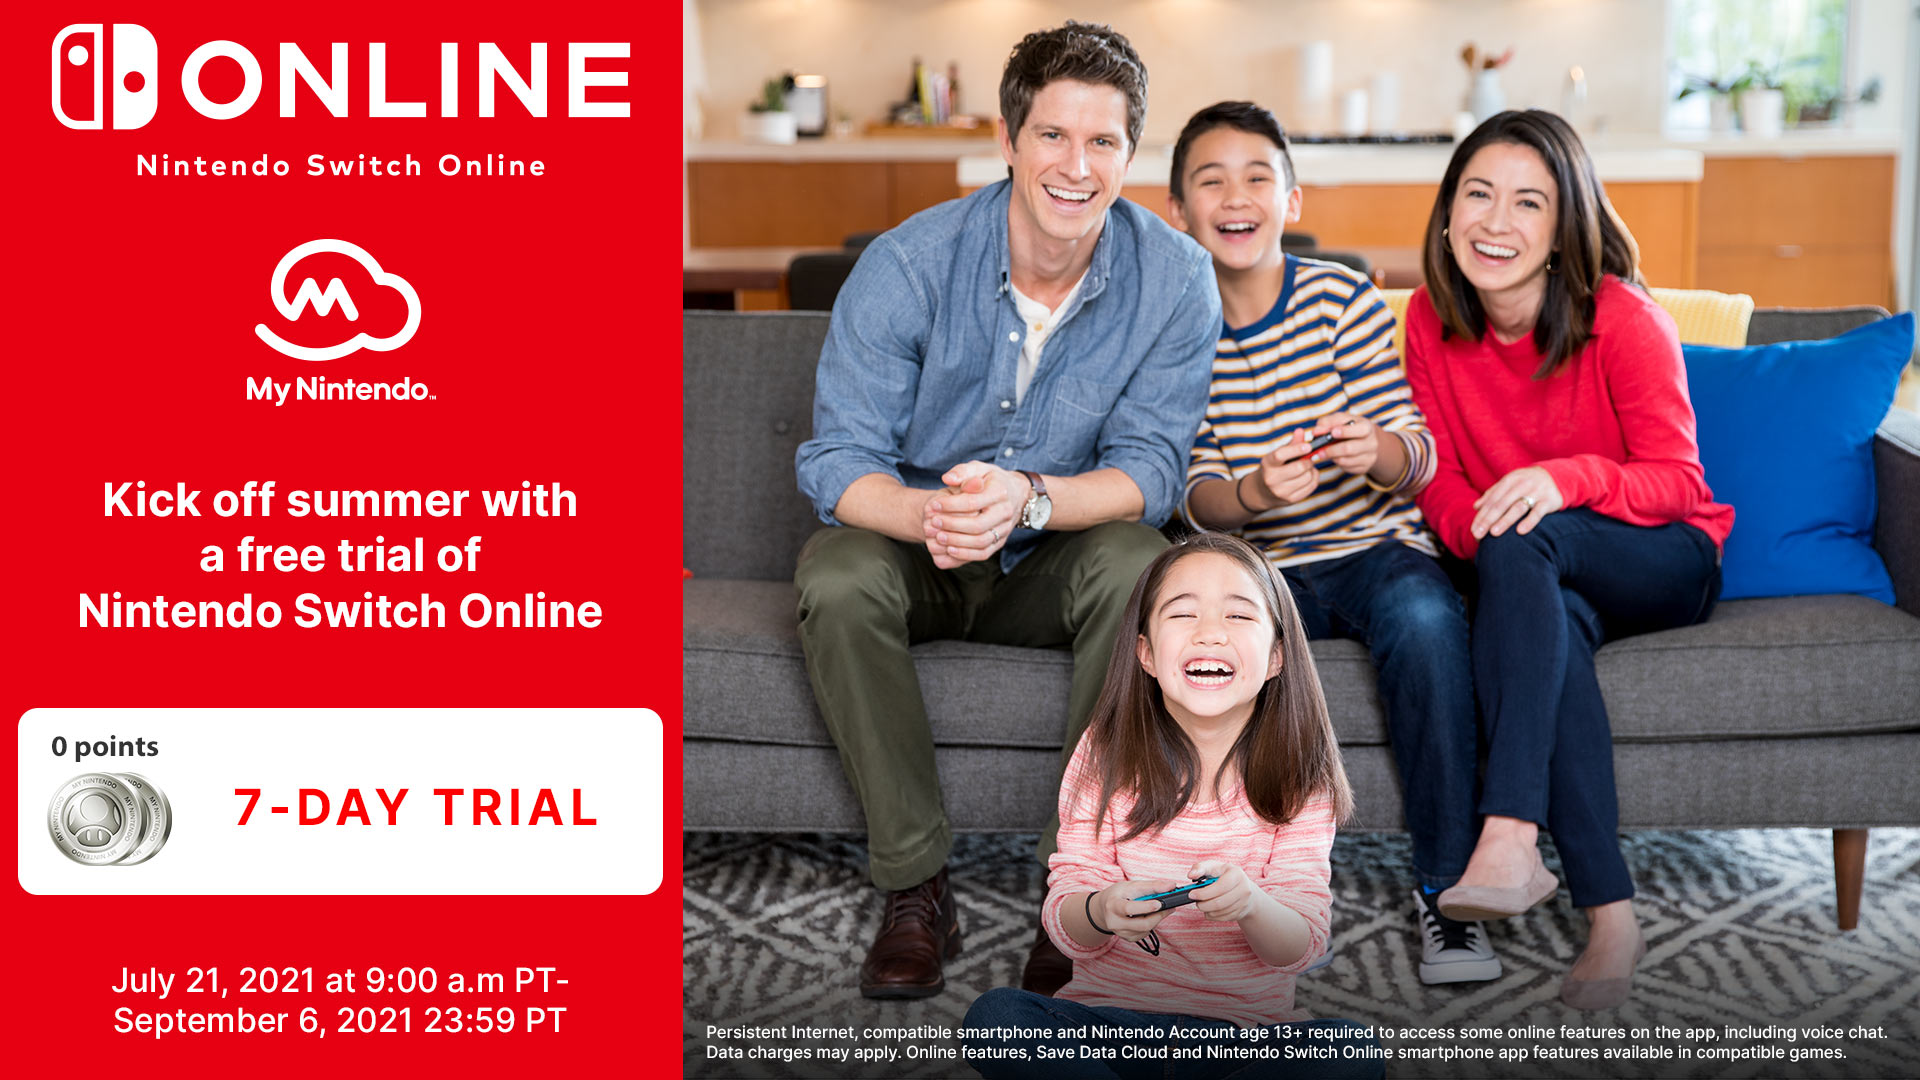 Twitter 上的Nintendo of America："Start a #NintendoSwitchOnline 7 Day Trial  without using any My Nintendo Platinum Points for this reward. Offer ends  tomorrow. More details: https://t.co/ZoxIMLFmhU https://t.co/IcKmX6P0UI" /  Twitter